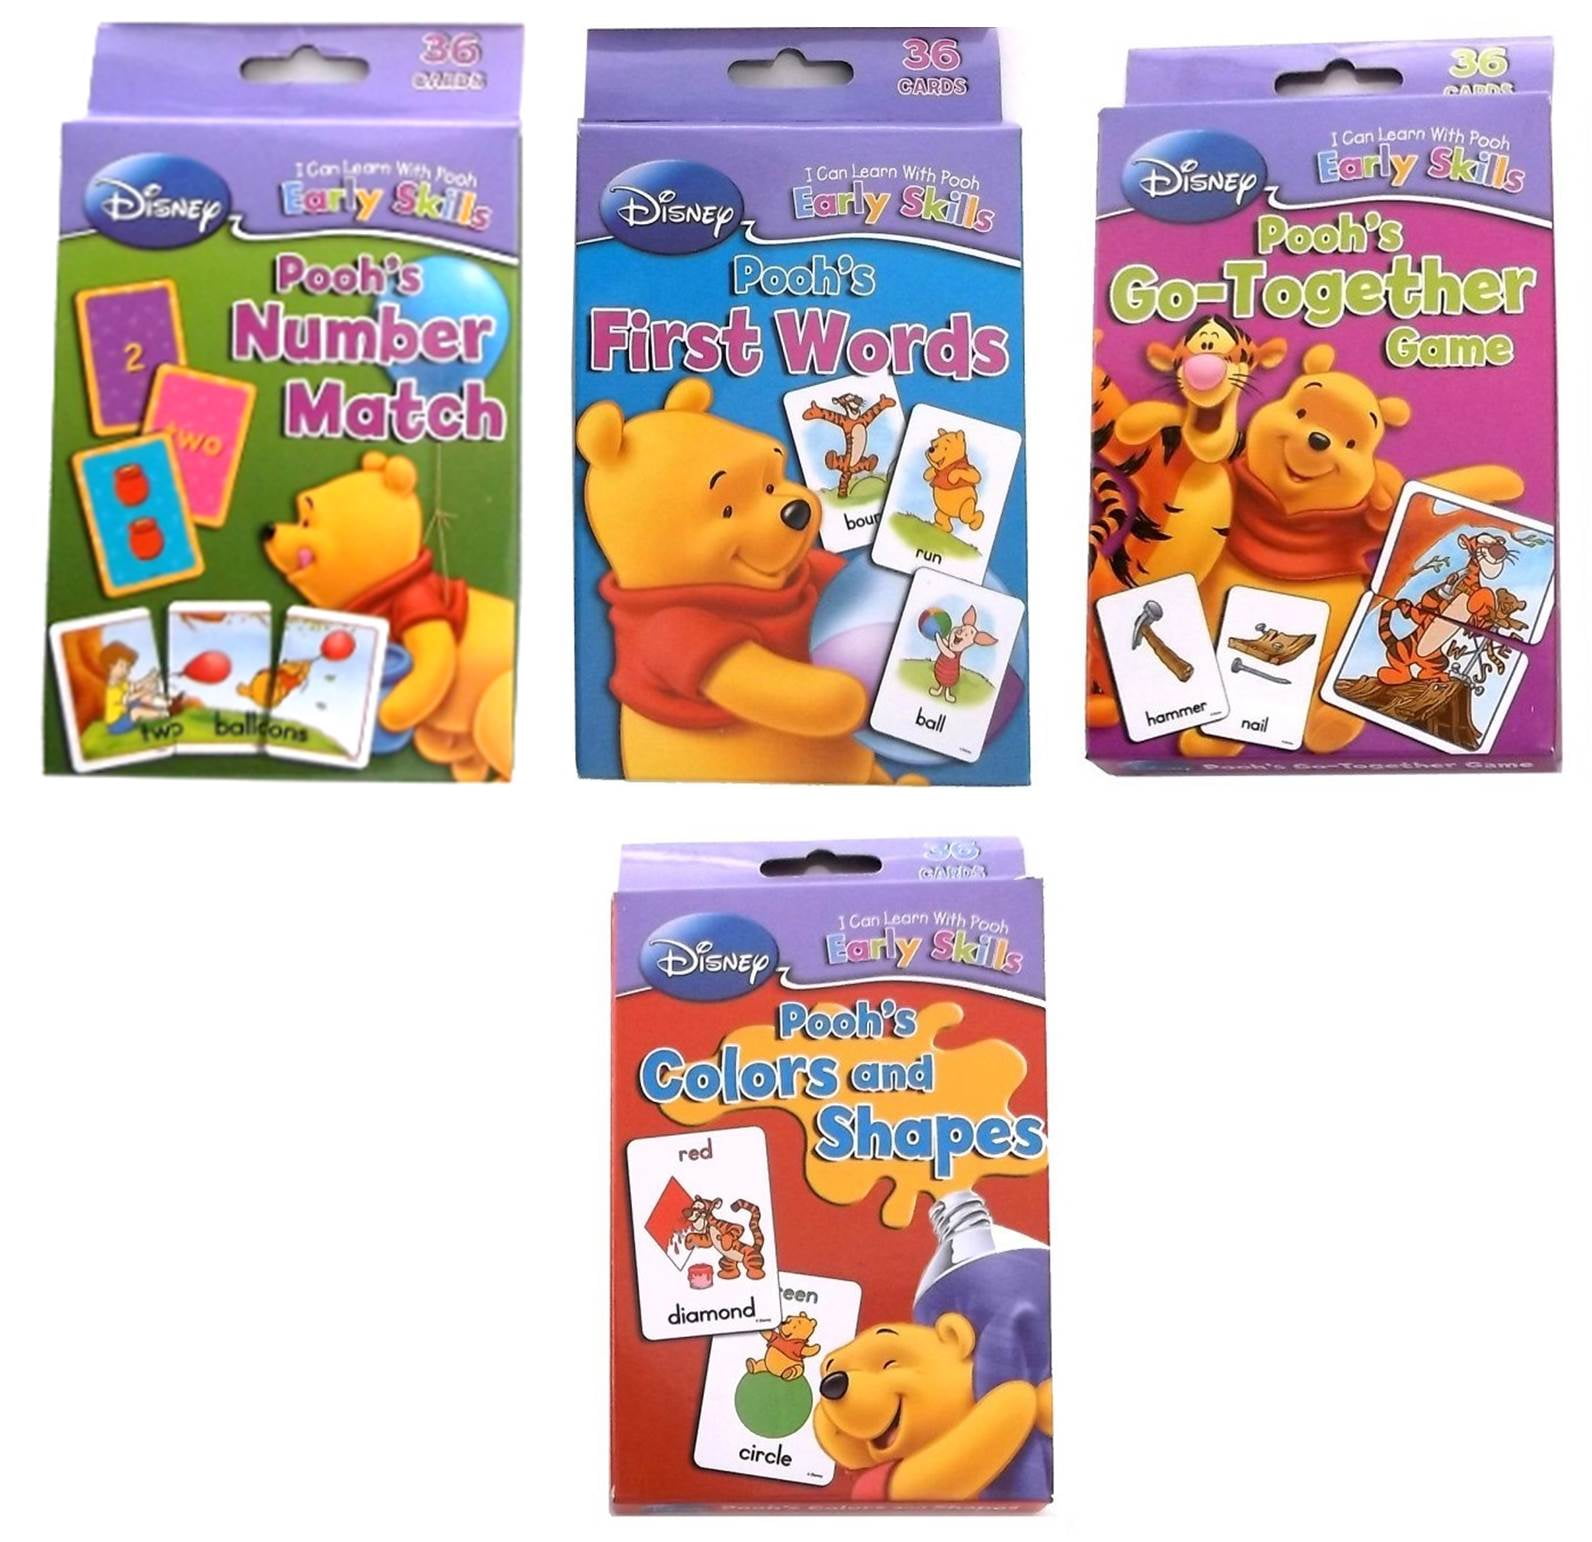 Disney Winnie the Pooh Flash Cards Colors And Shapes Go together Number Match 